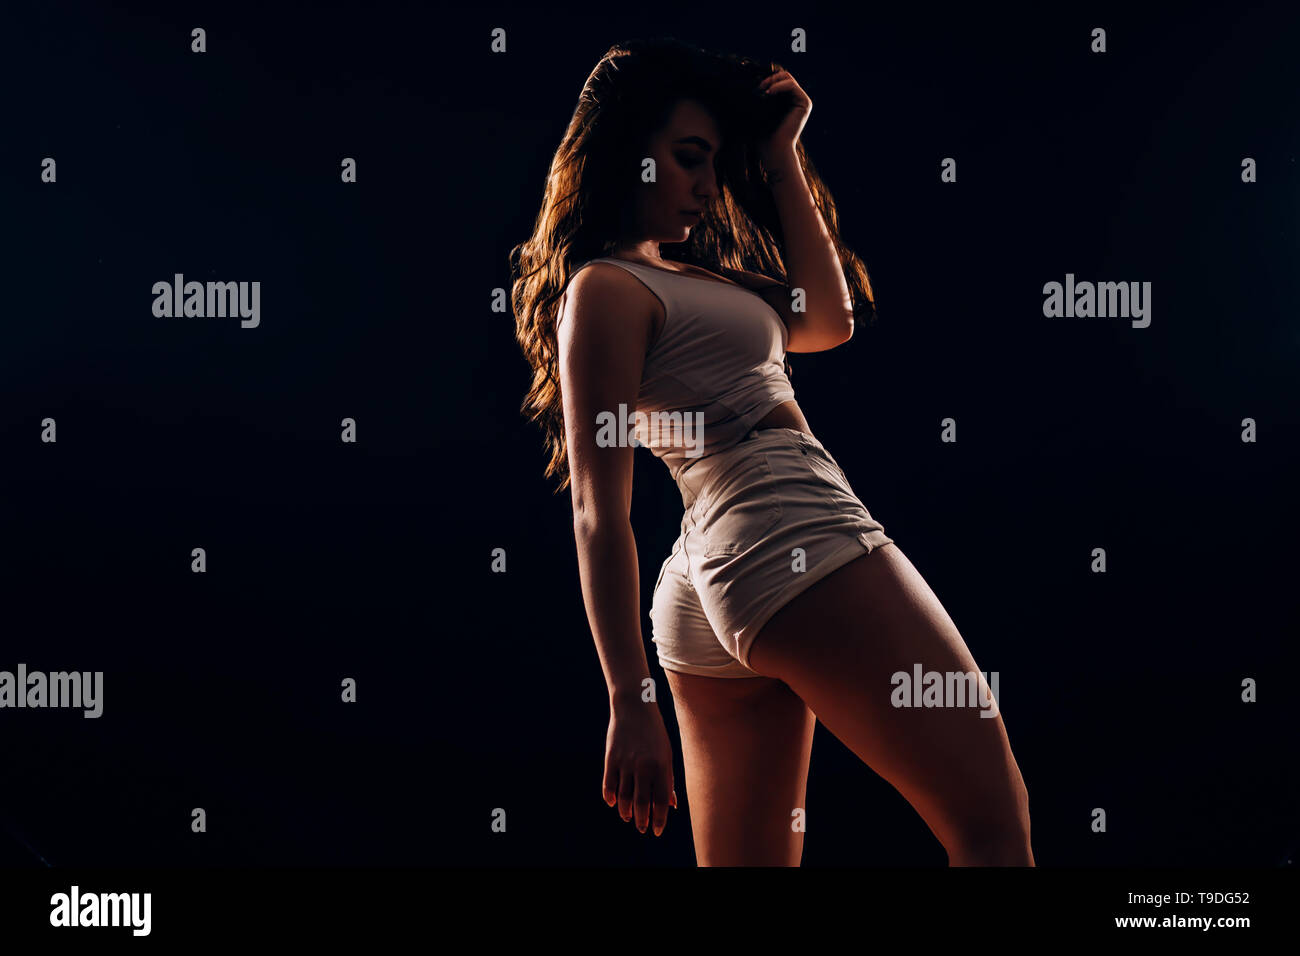 Dance, fitness, sports, health concept. Beautiful brunette woman with a slim  figure in white shorts and top posing on a black background in the dark  Stock Photo - Alamy